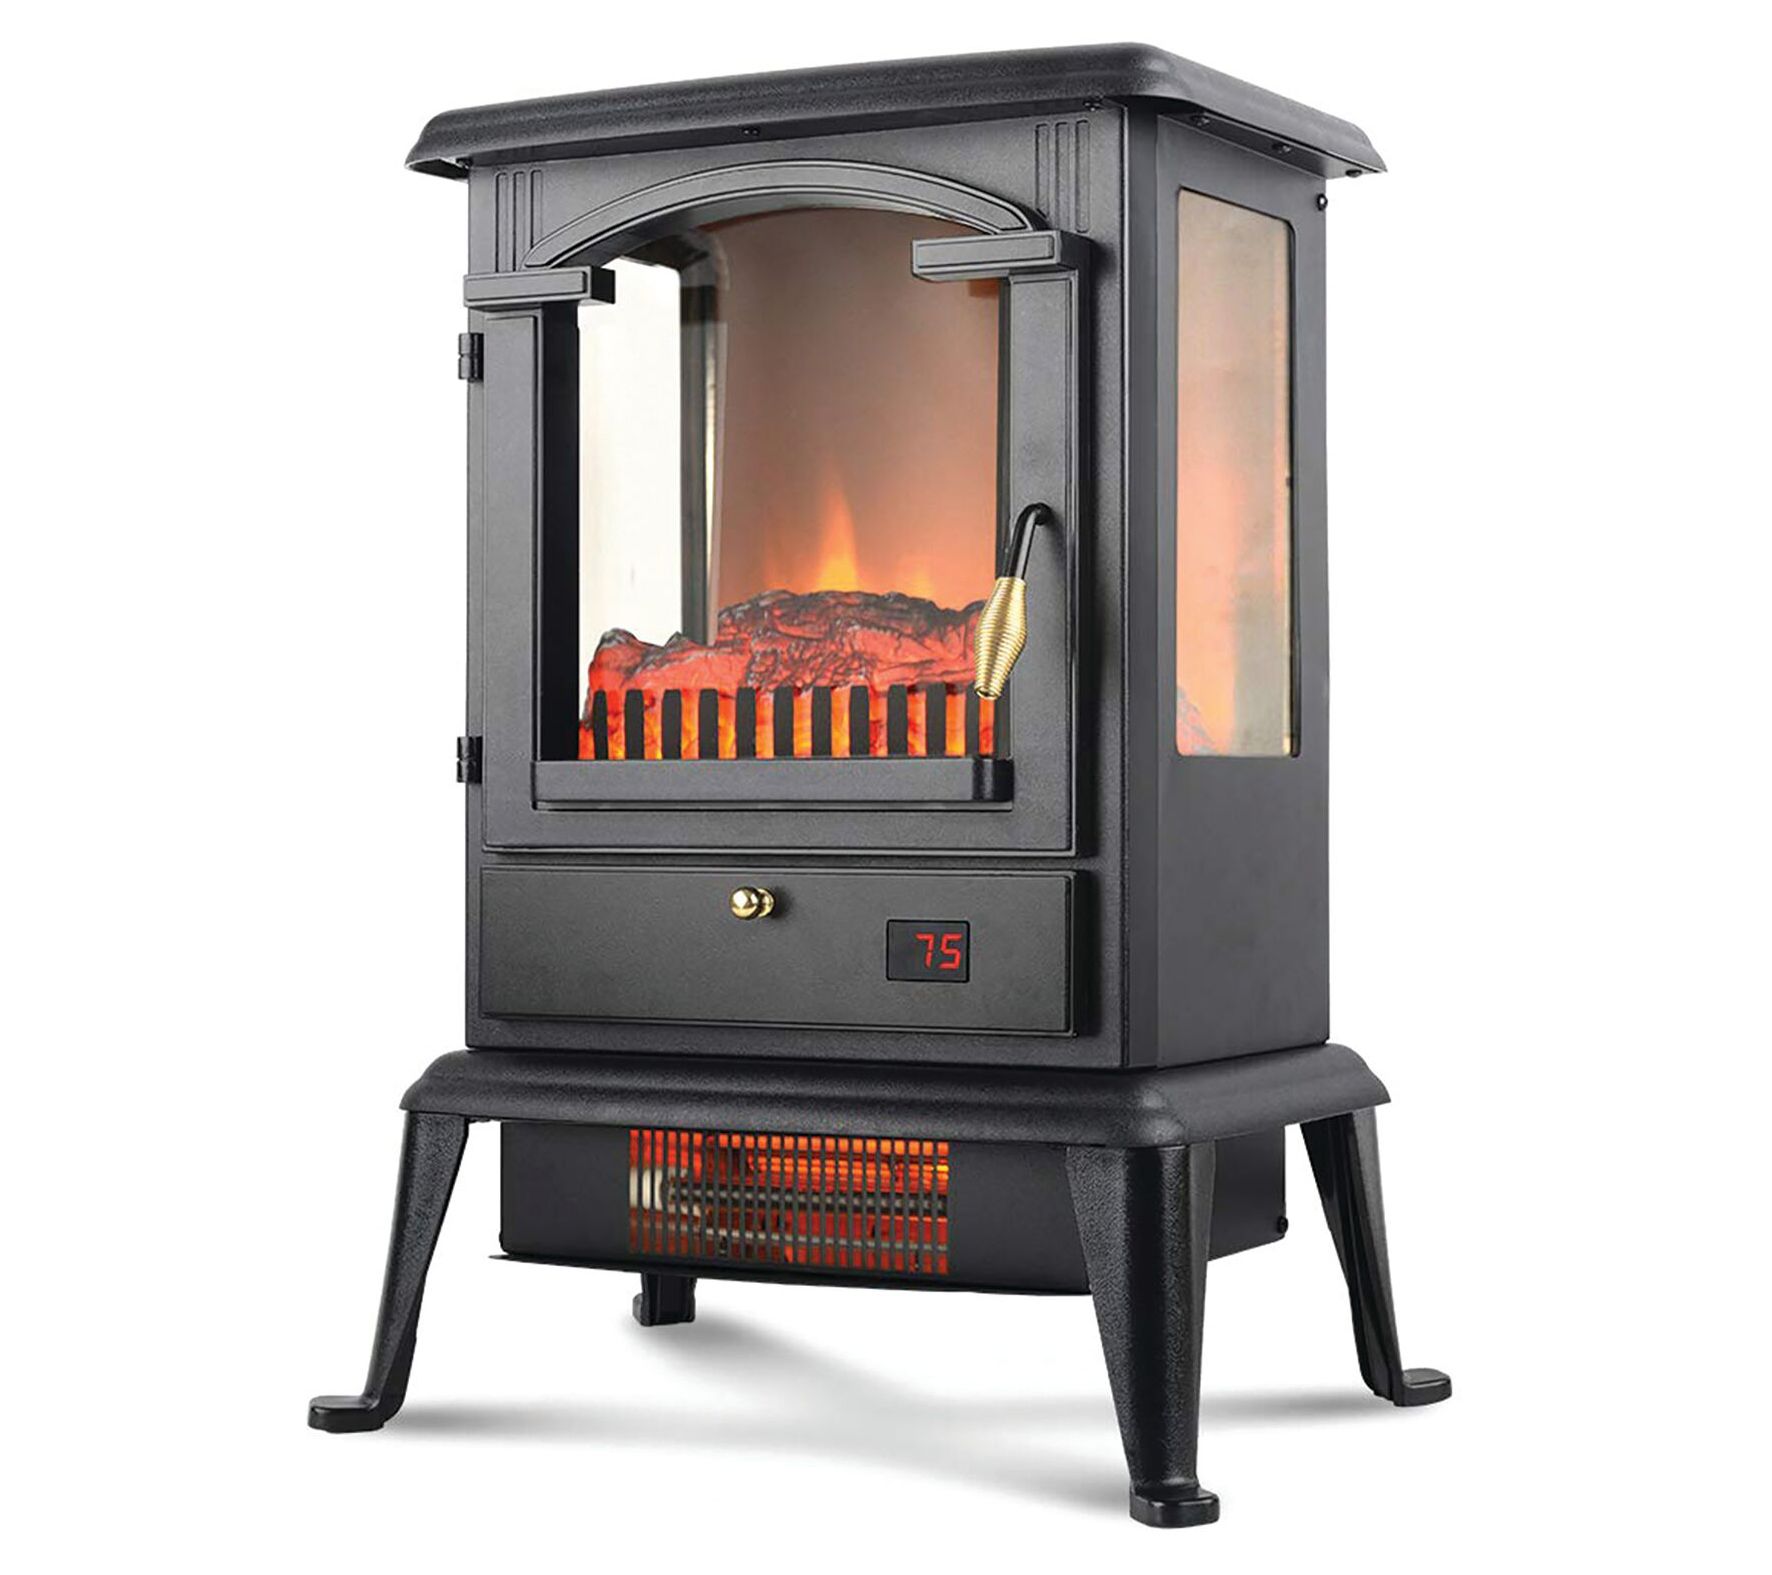 LifeSmart 3-Sided Flame View Infrared Heater Stove - QVC.com